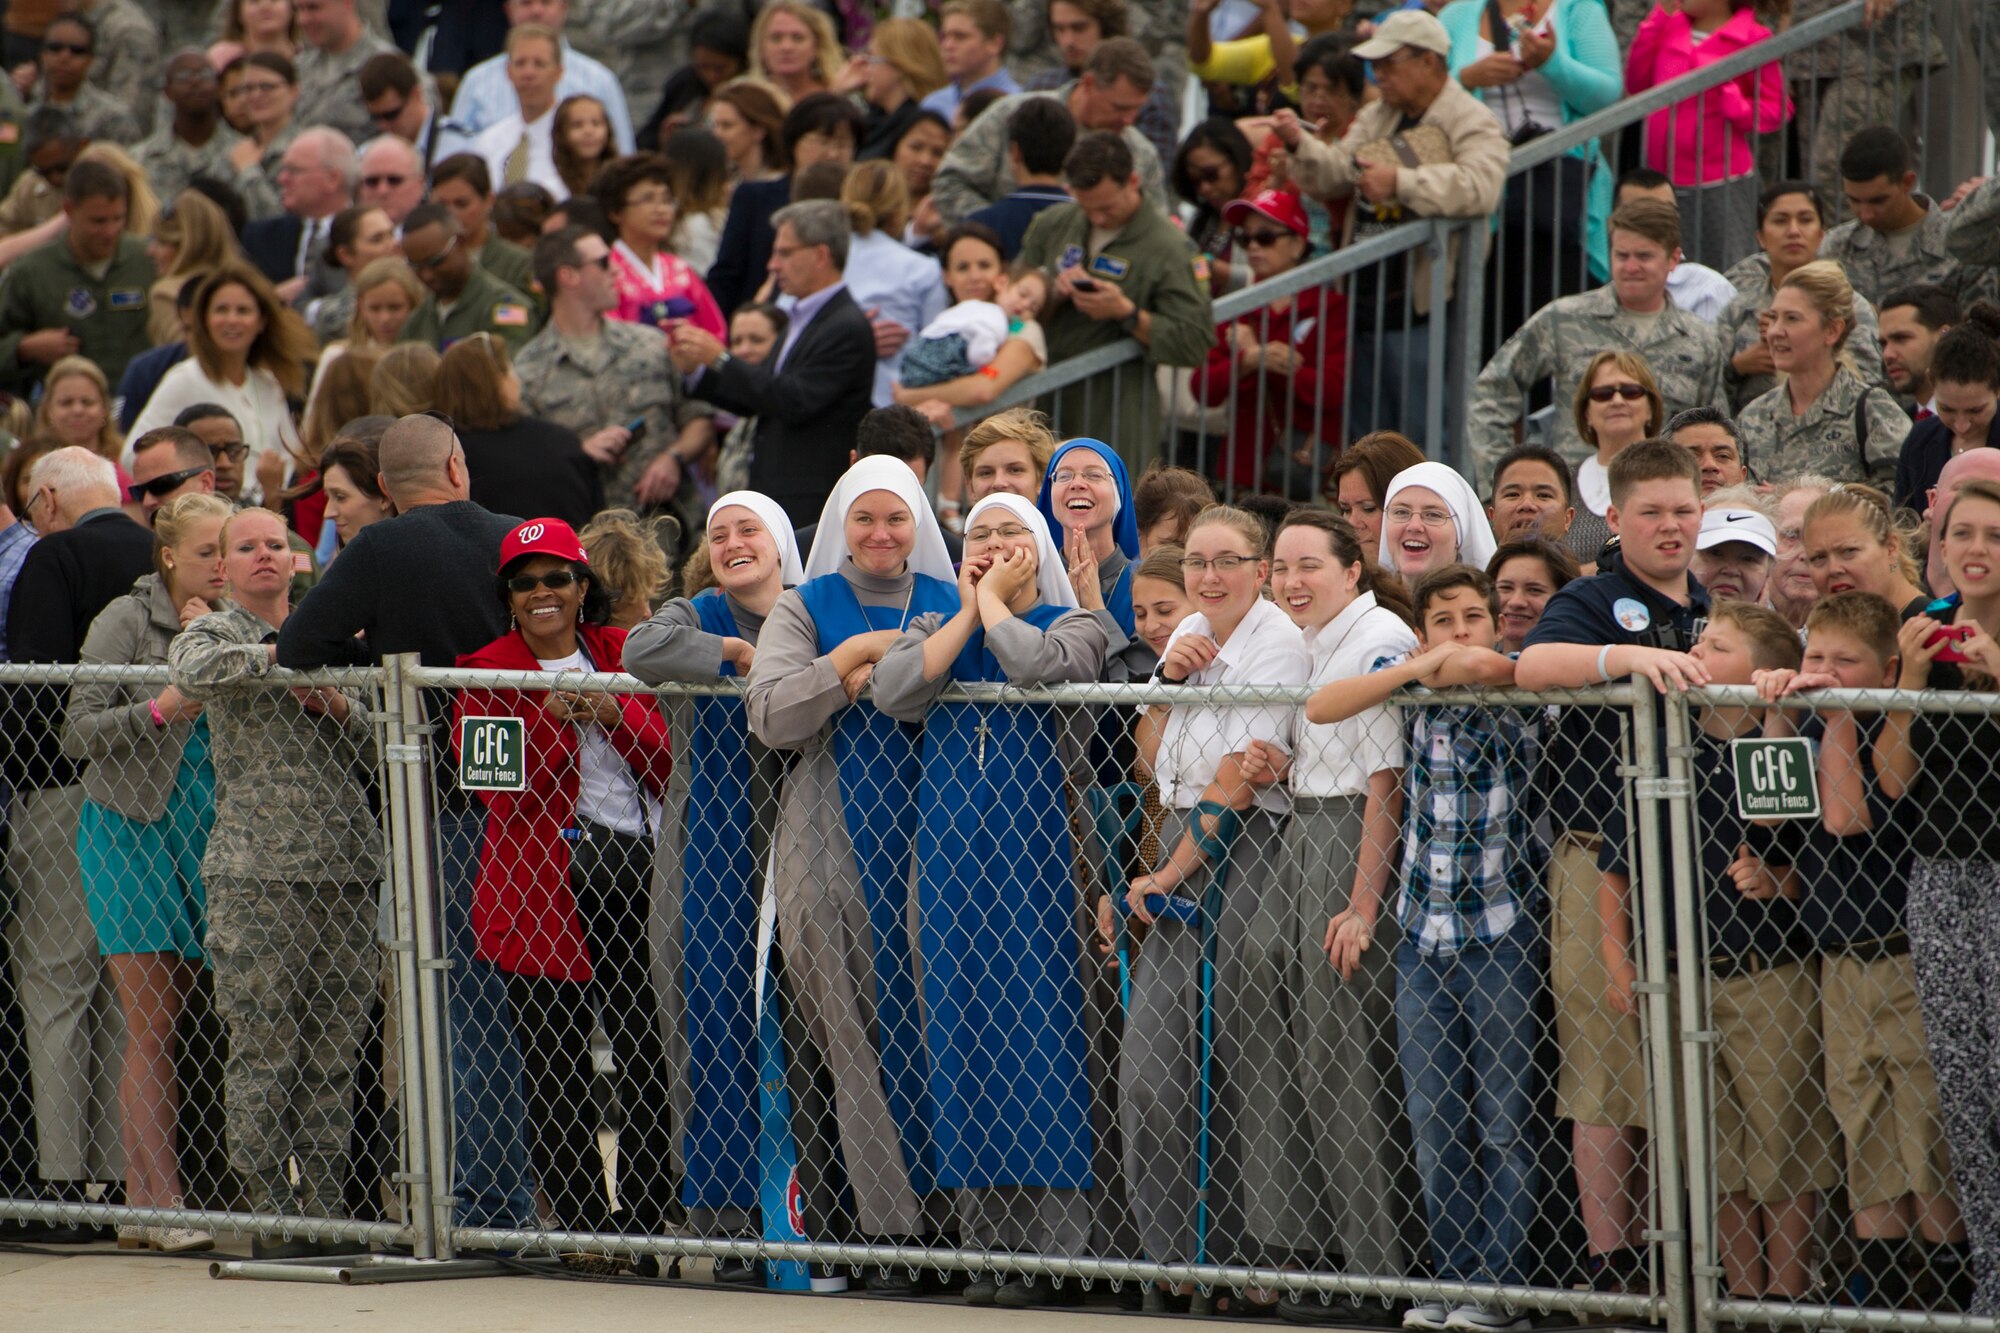 More than one thousand people look on as Pope Francis arrives at Joint Base Andrews, Md. Sept. 22, 2015.  This marks his first visit to the United States. (U.S. Air Force Photo/Tech. Sgt. Robert Cloys)